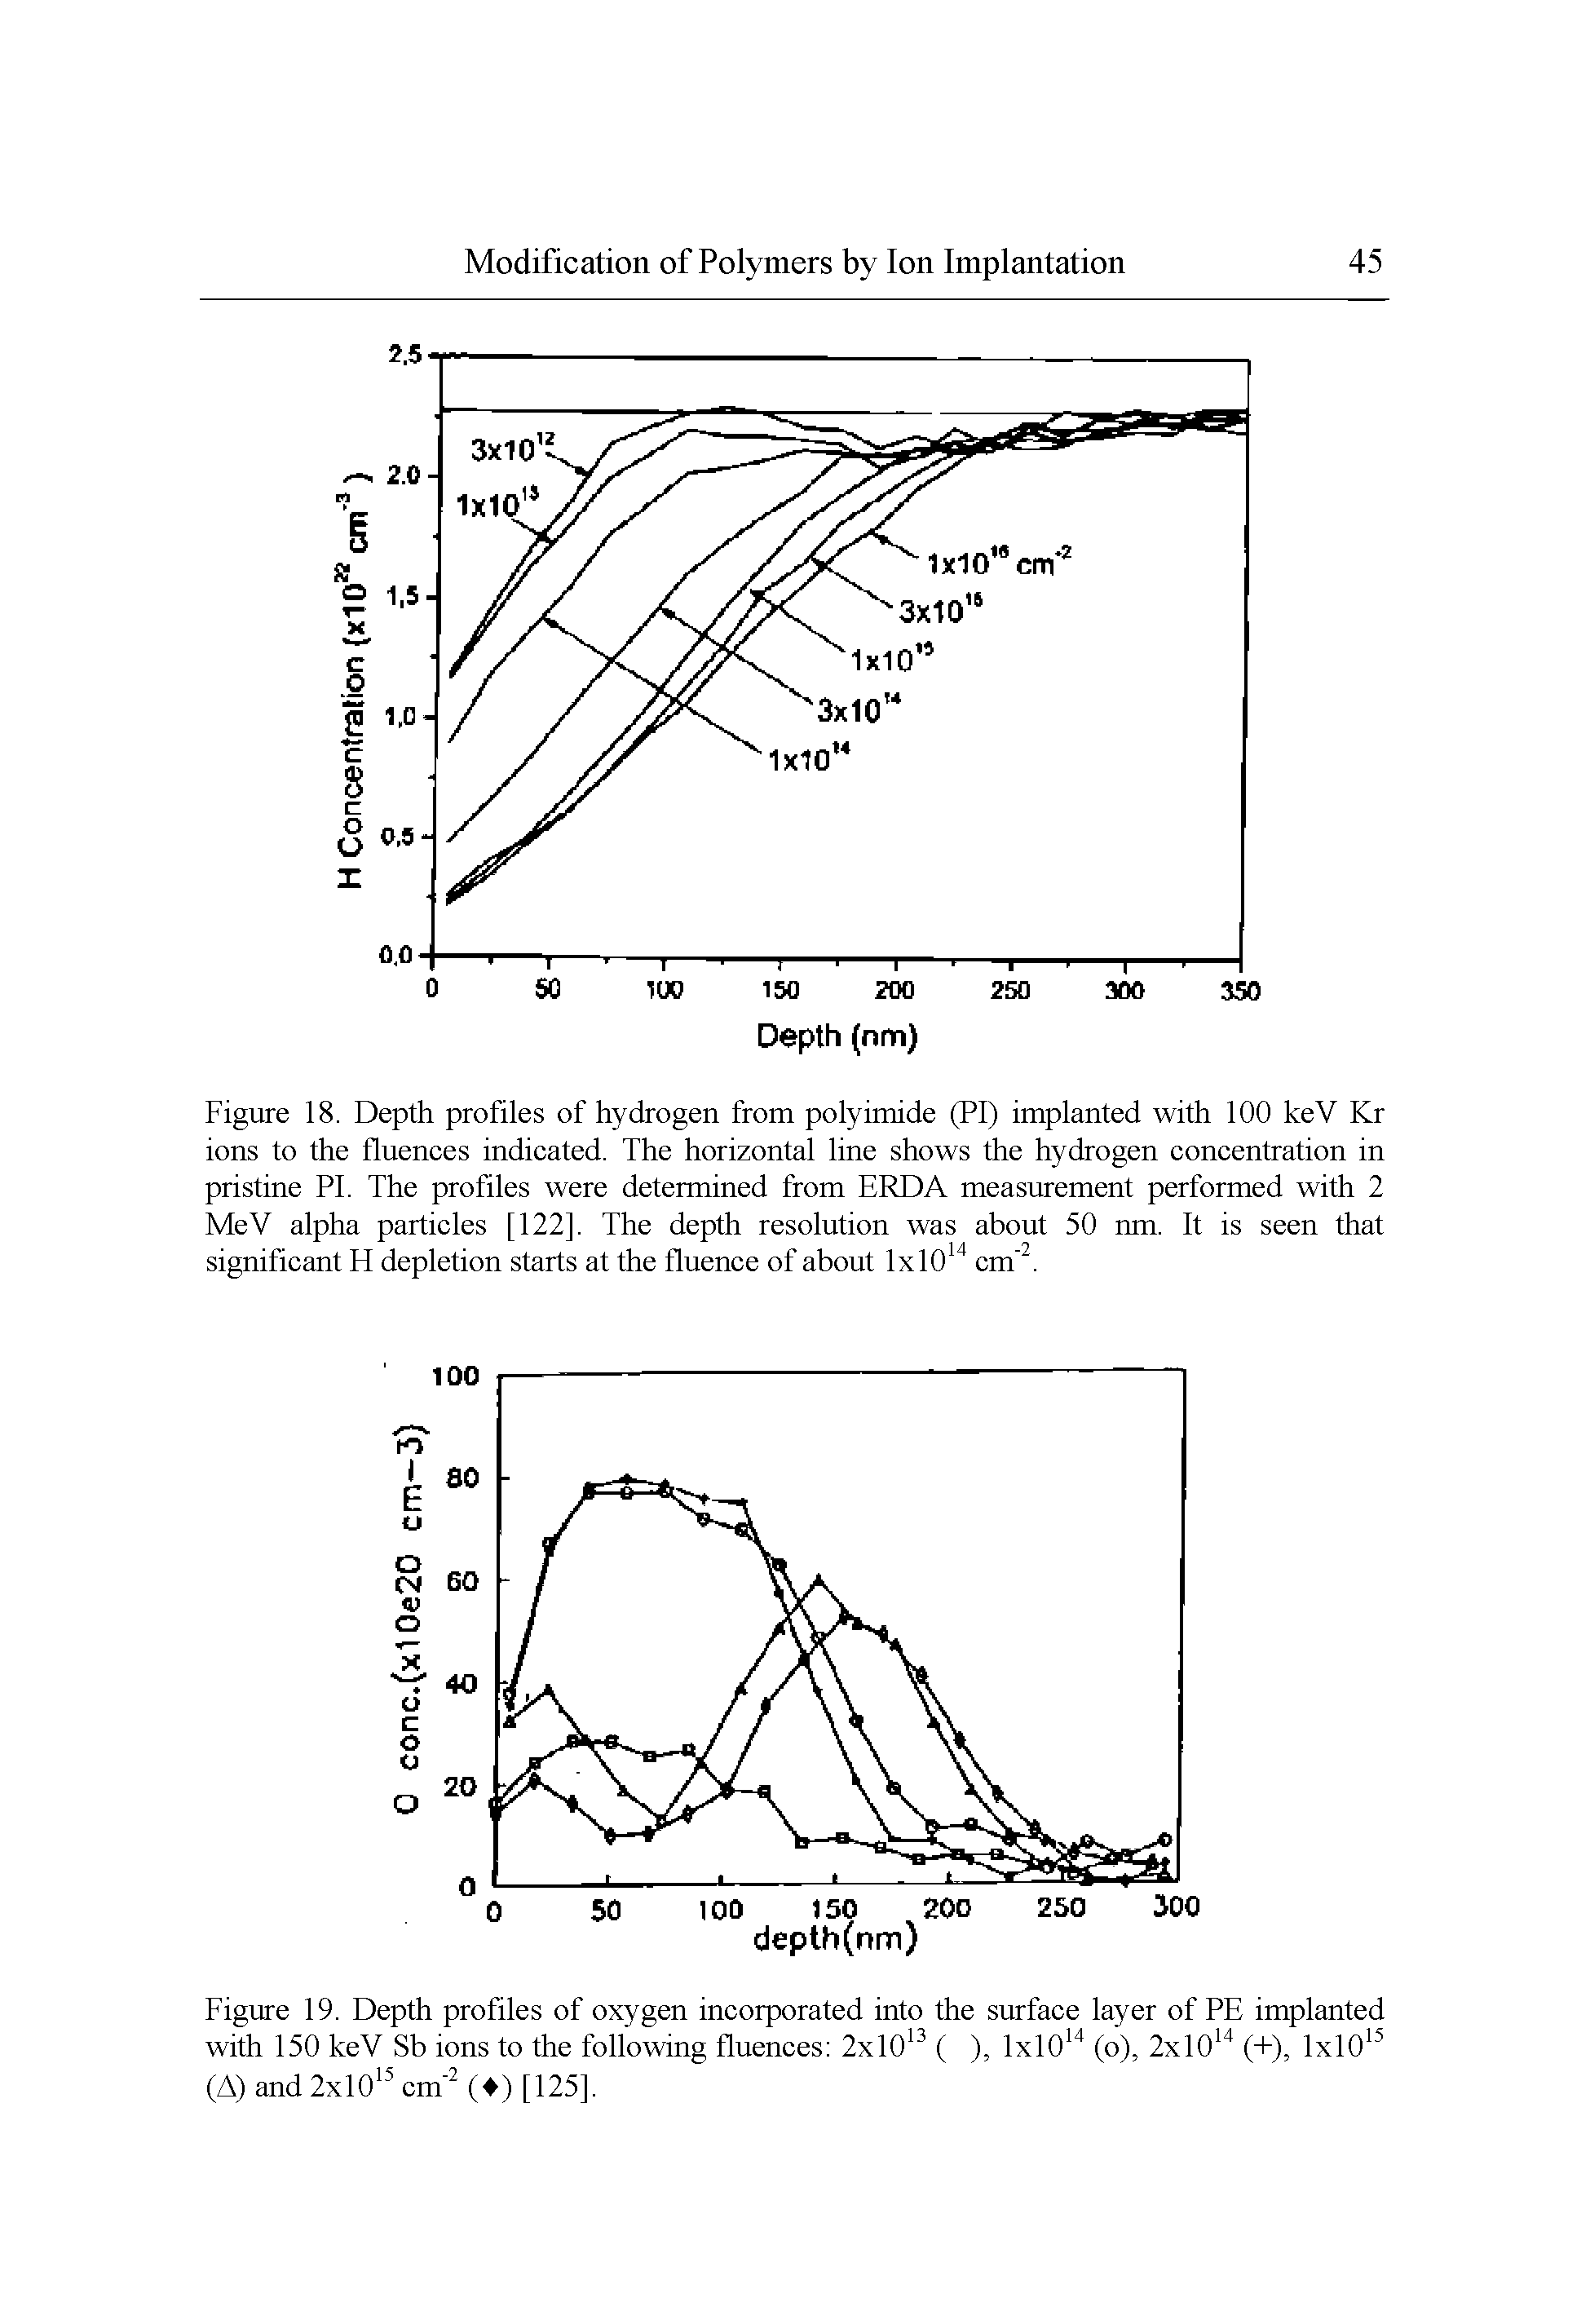 Figure 19. Depth profiles of oxygen incorporated into the surface layer of PE implanted with 150 keV Sb ions to the following fluences 2xl0 ( ).